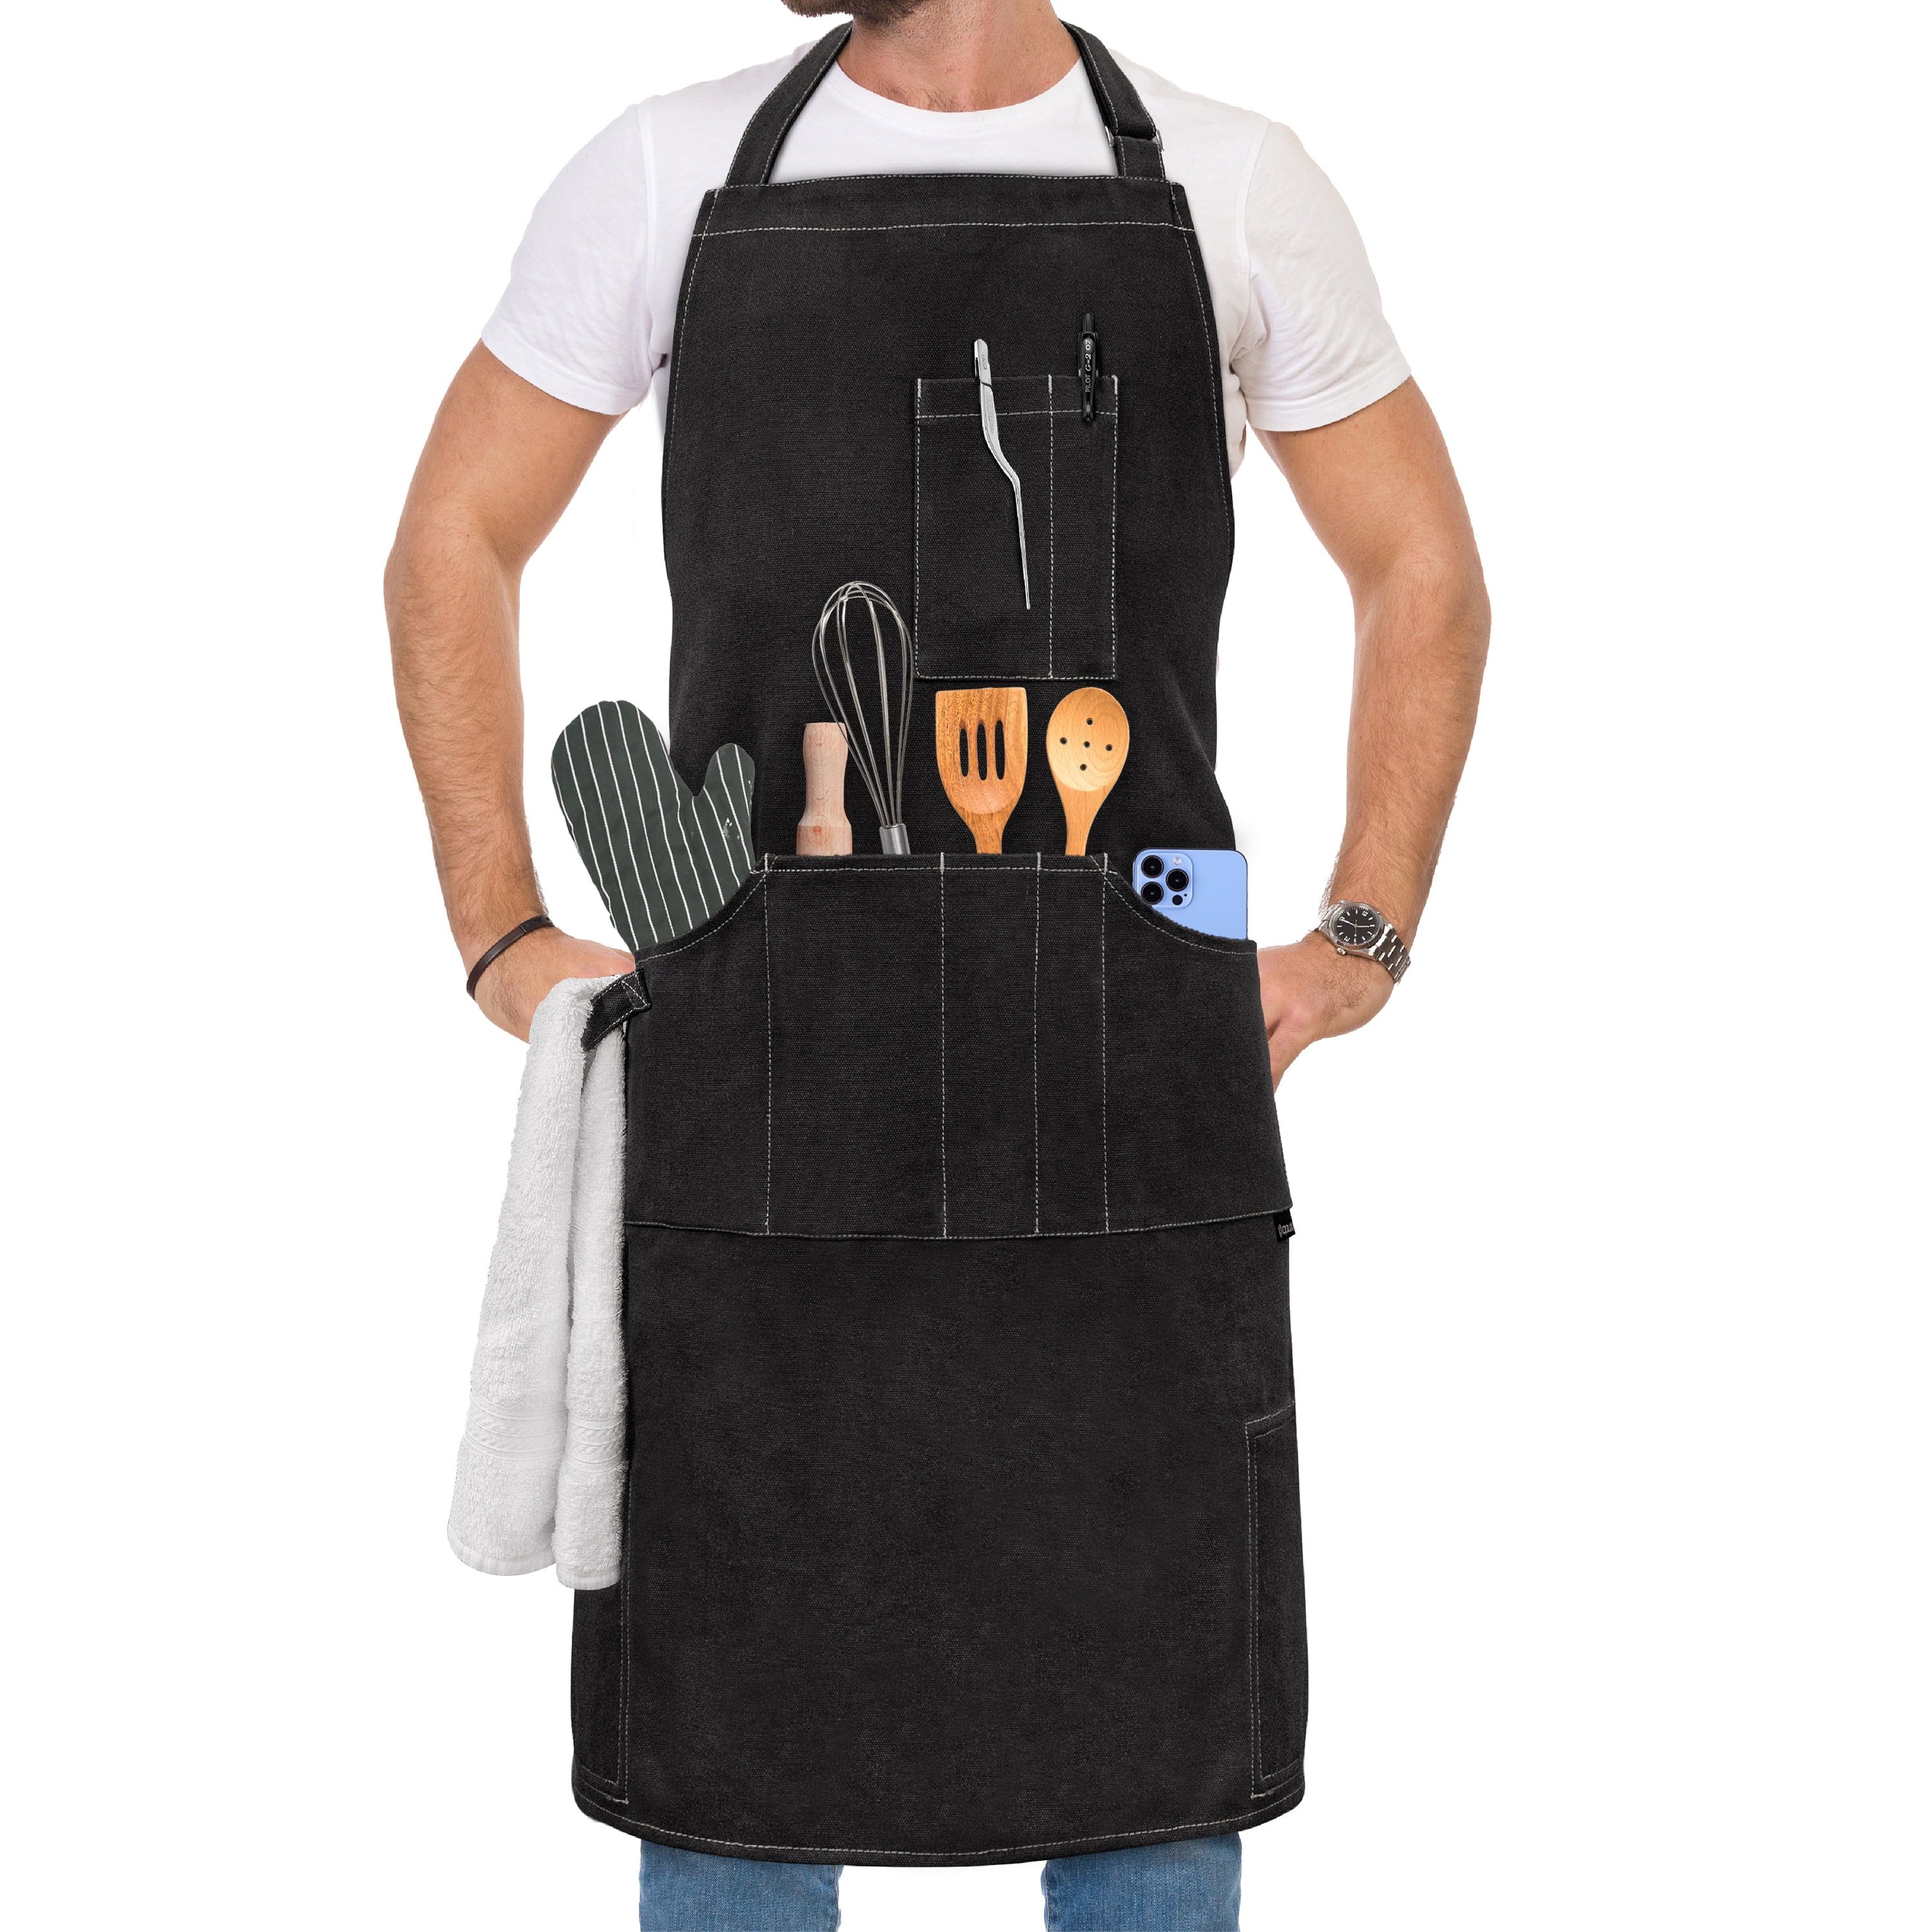 Home-x Disposable Aprons for Restaurant and Home Use, Semi-Transparent Plastic Aprons with Ties for Women and Men, Set of 20, 45 L x 28 W